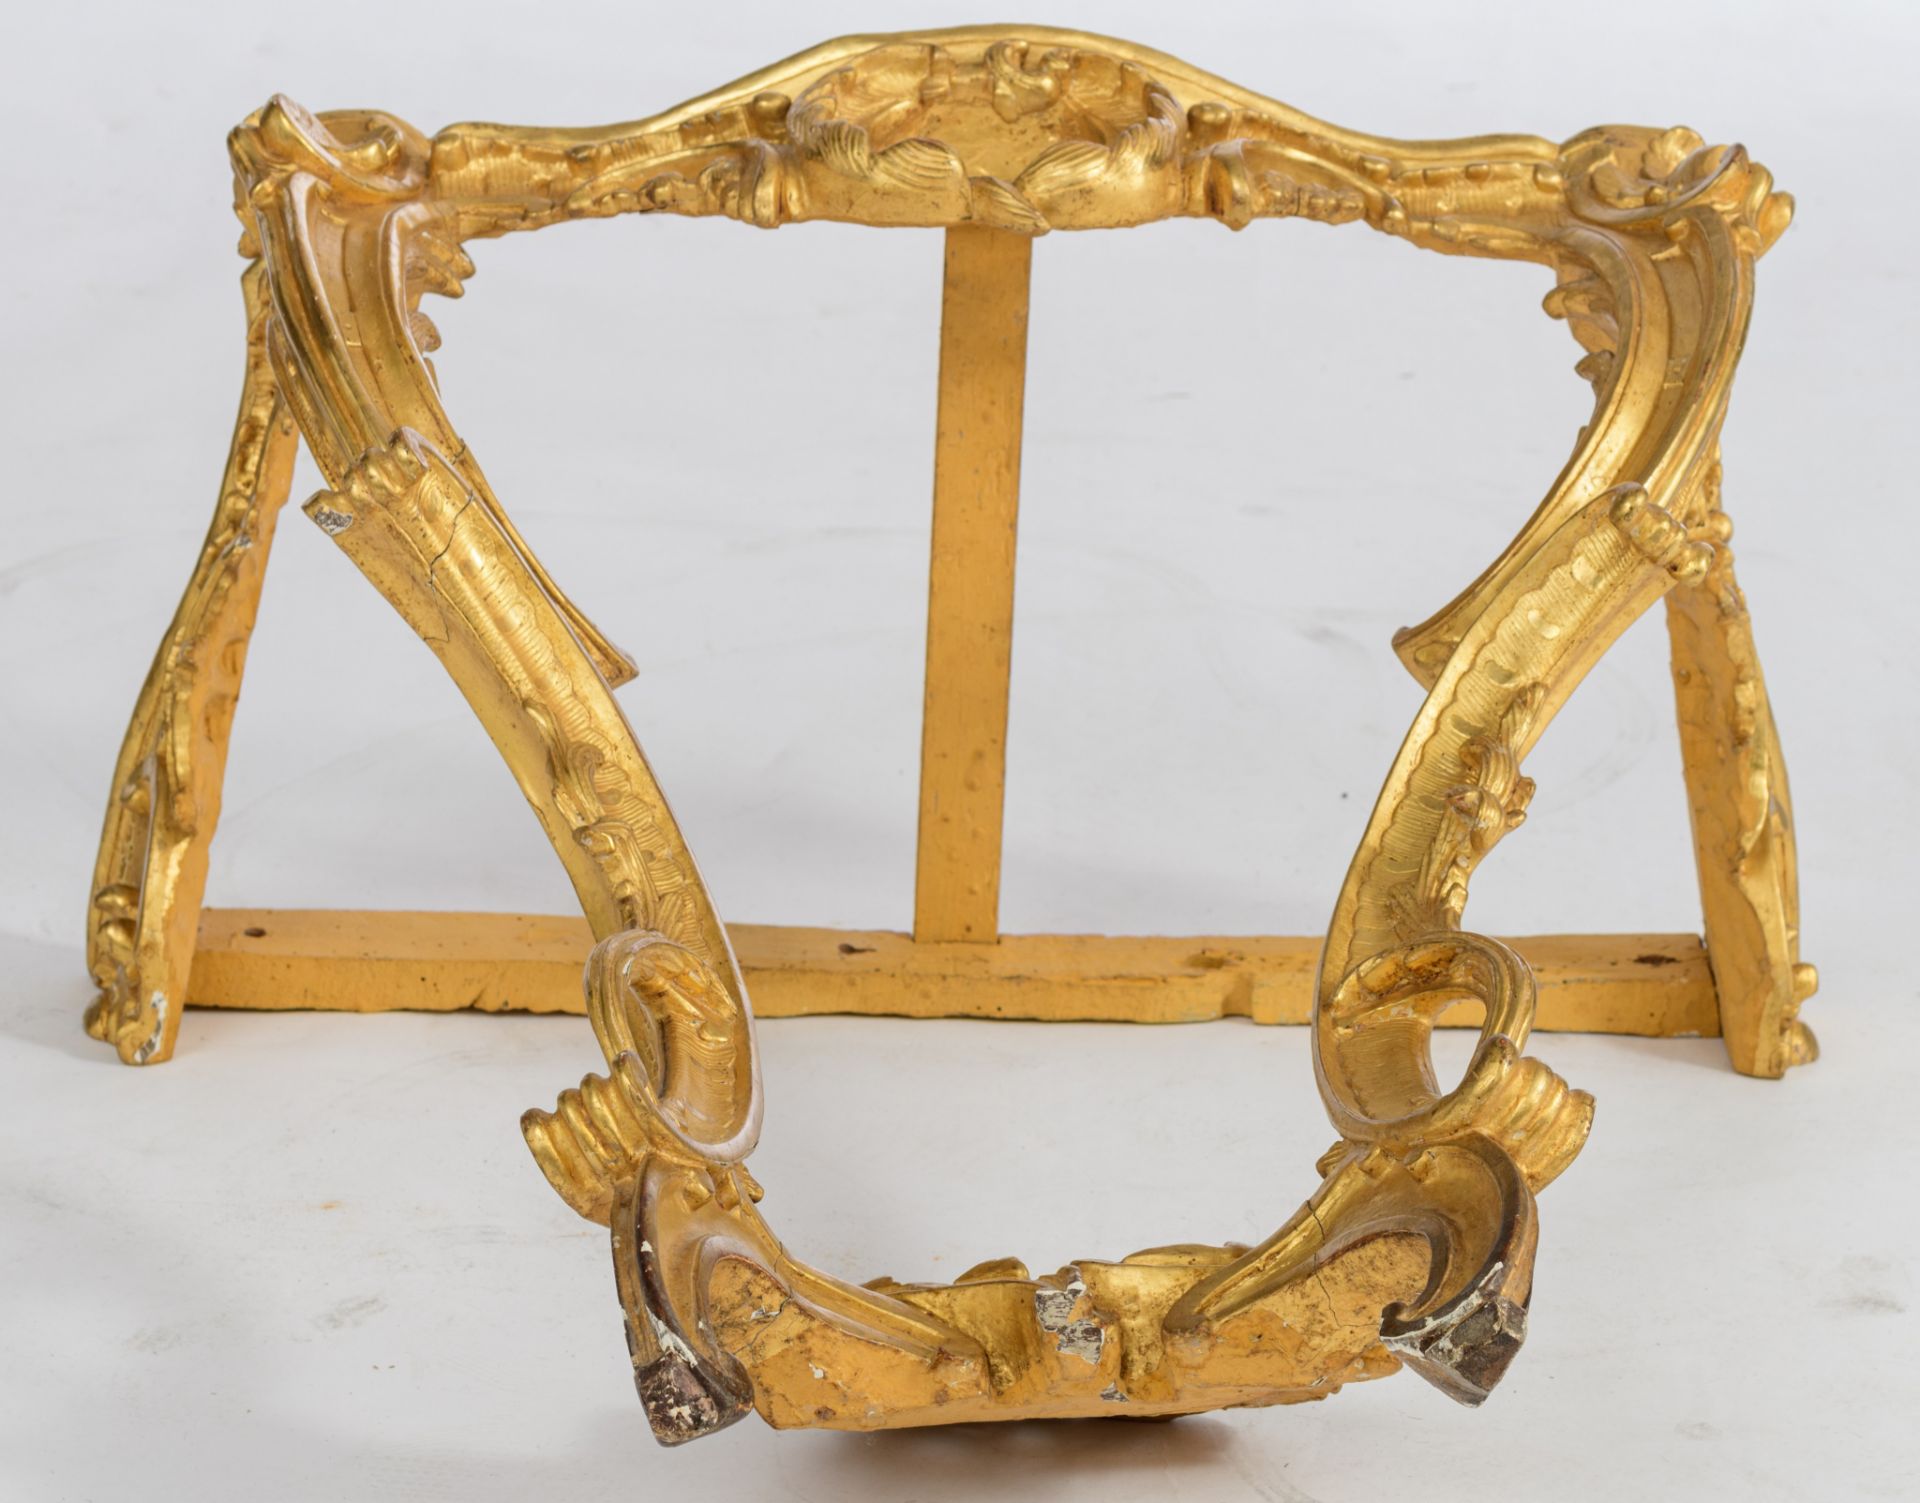 A richly carved giltwood Rococo console table, mid 18thC, H 83 - W 81,5 - D 48,5 cm - Image 11 of 11